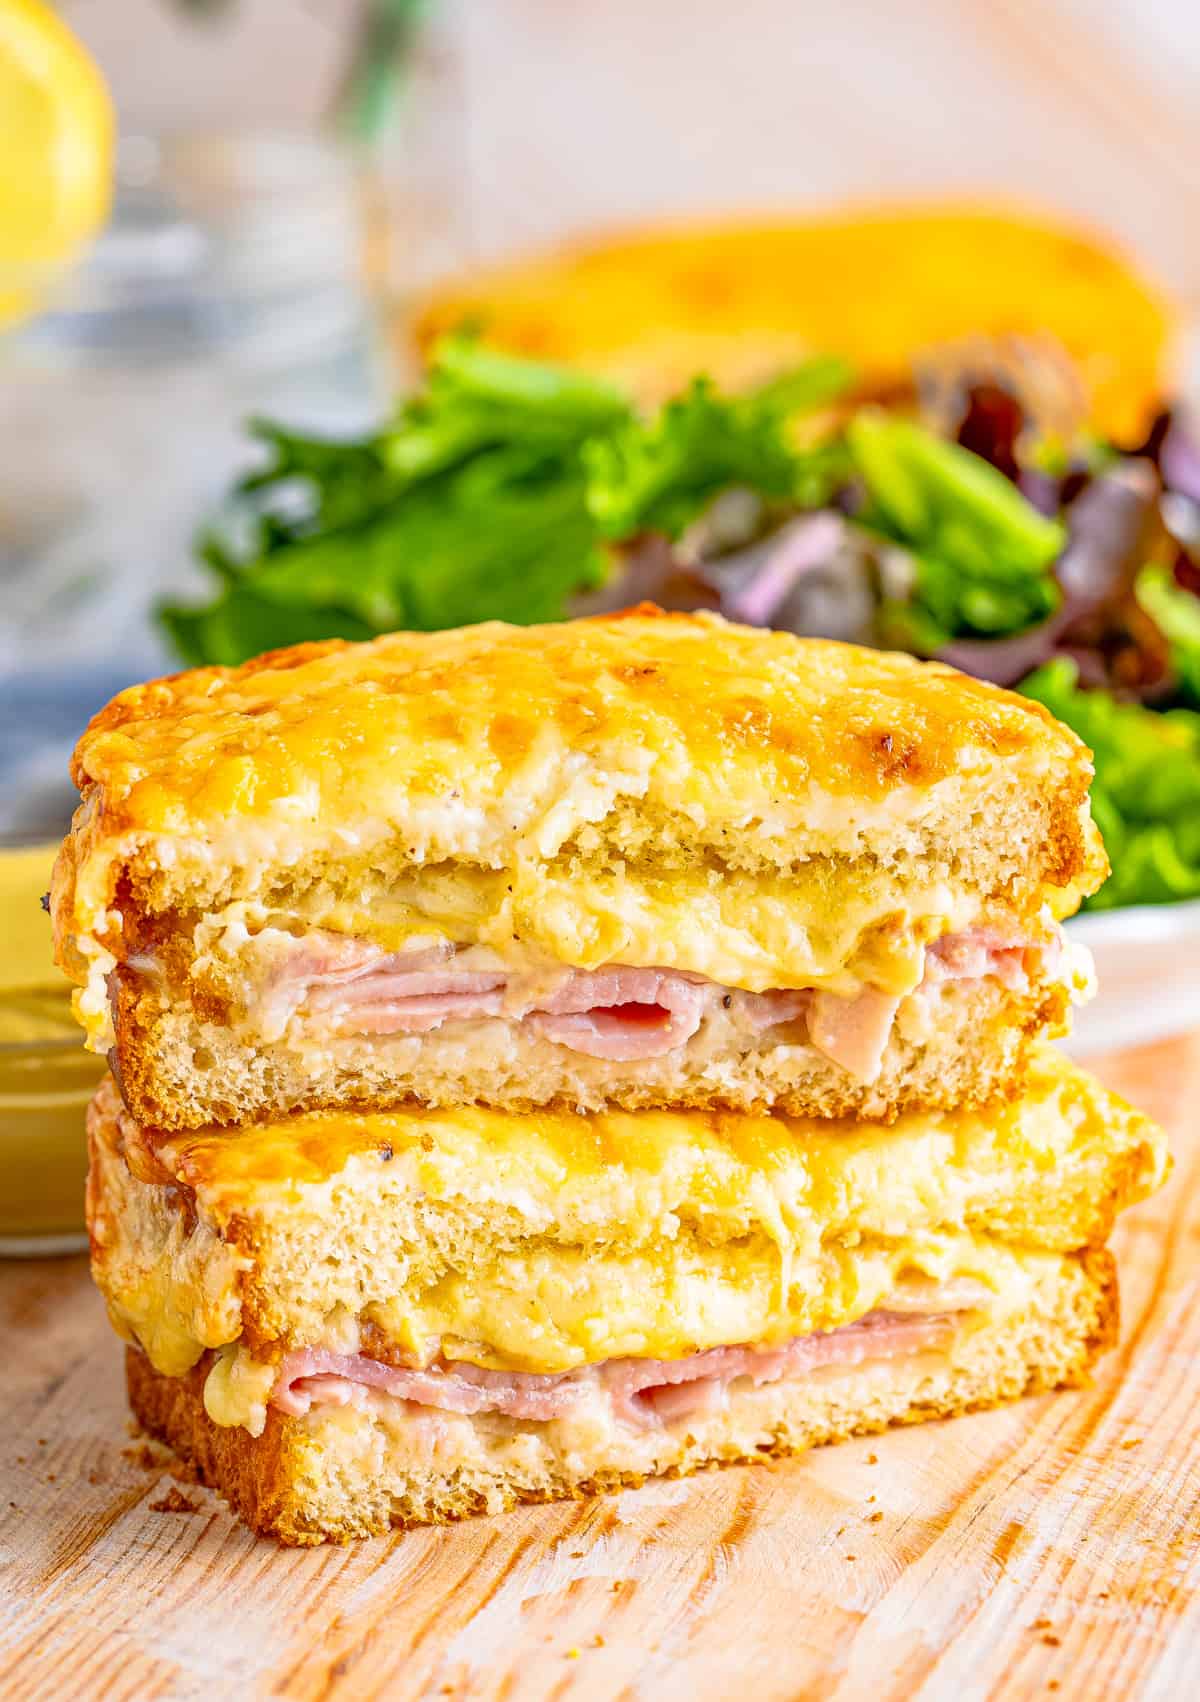 Croque Monsieur Recipe cut in half with the two halves stacked on top of one another showing inside sandwich with salad in background.